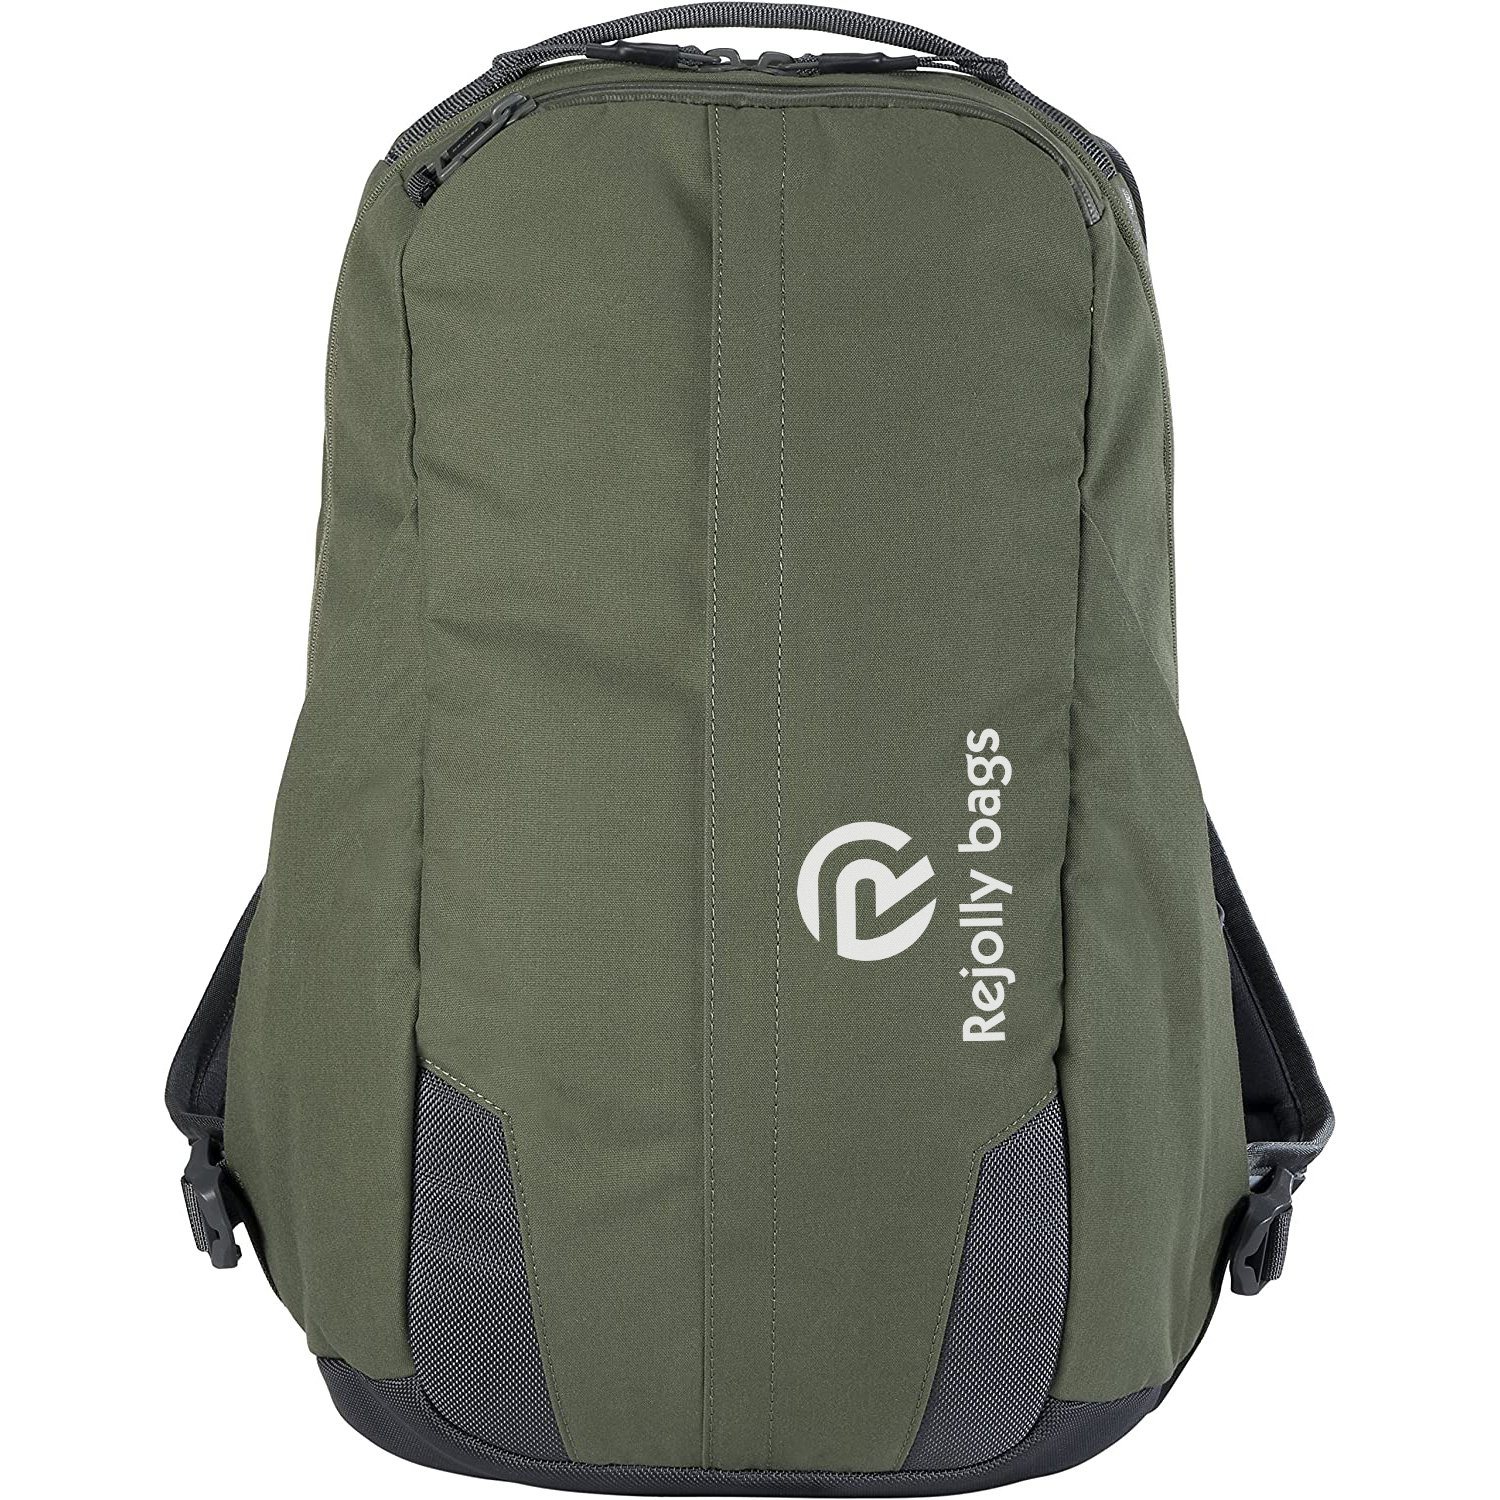 Durable Water Resistant Coated 1000d Nylon Outer Shell Large Capacity Dry Backpack